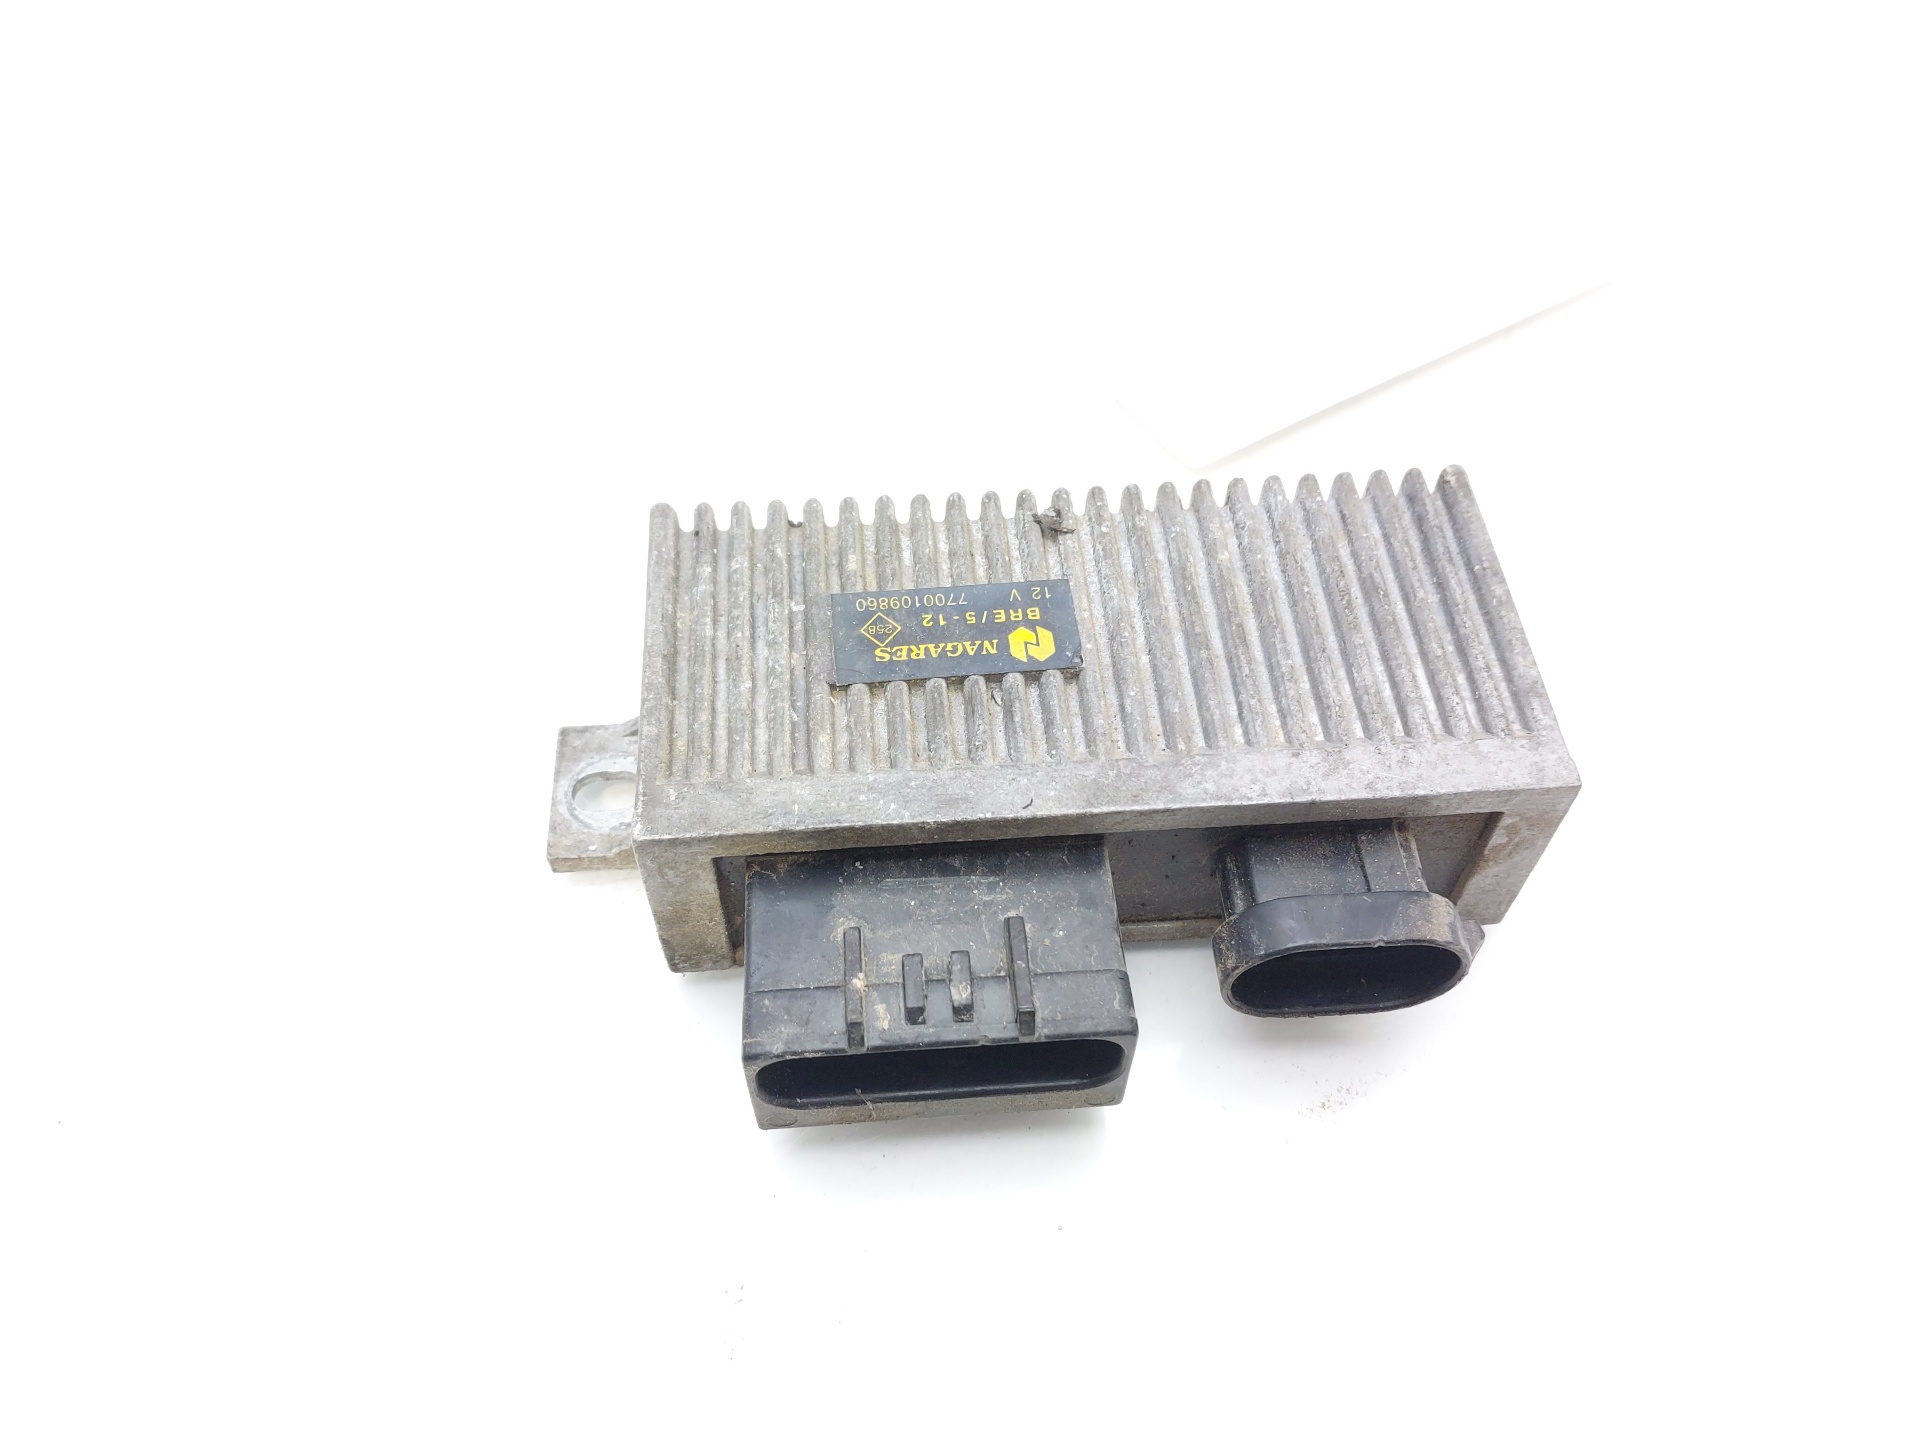 RENAULT Trafic W211/S211 (2002-2009) Relays 7700109860 25044946